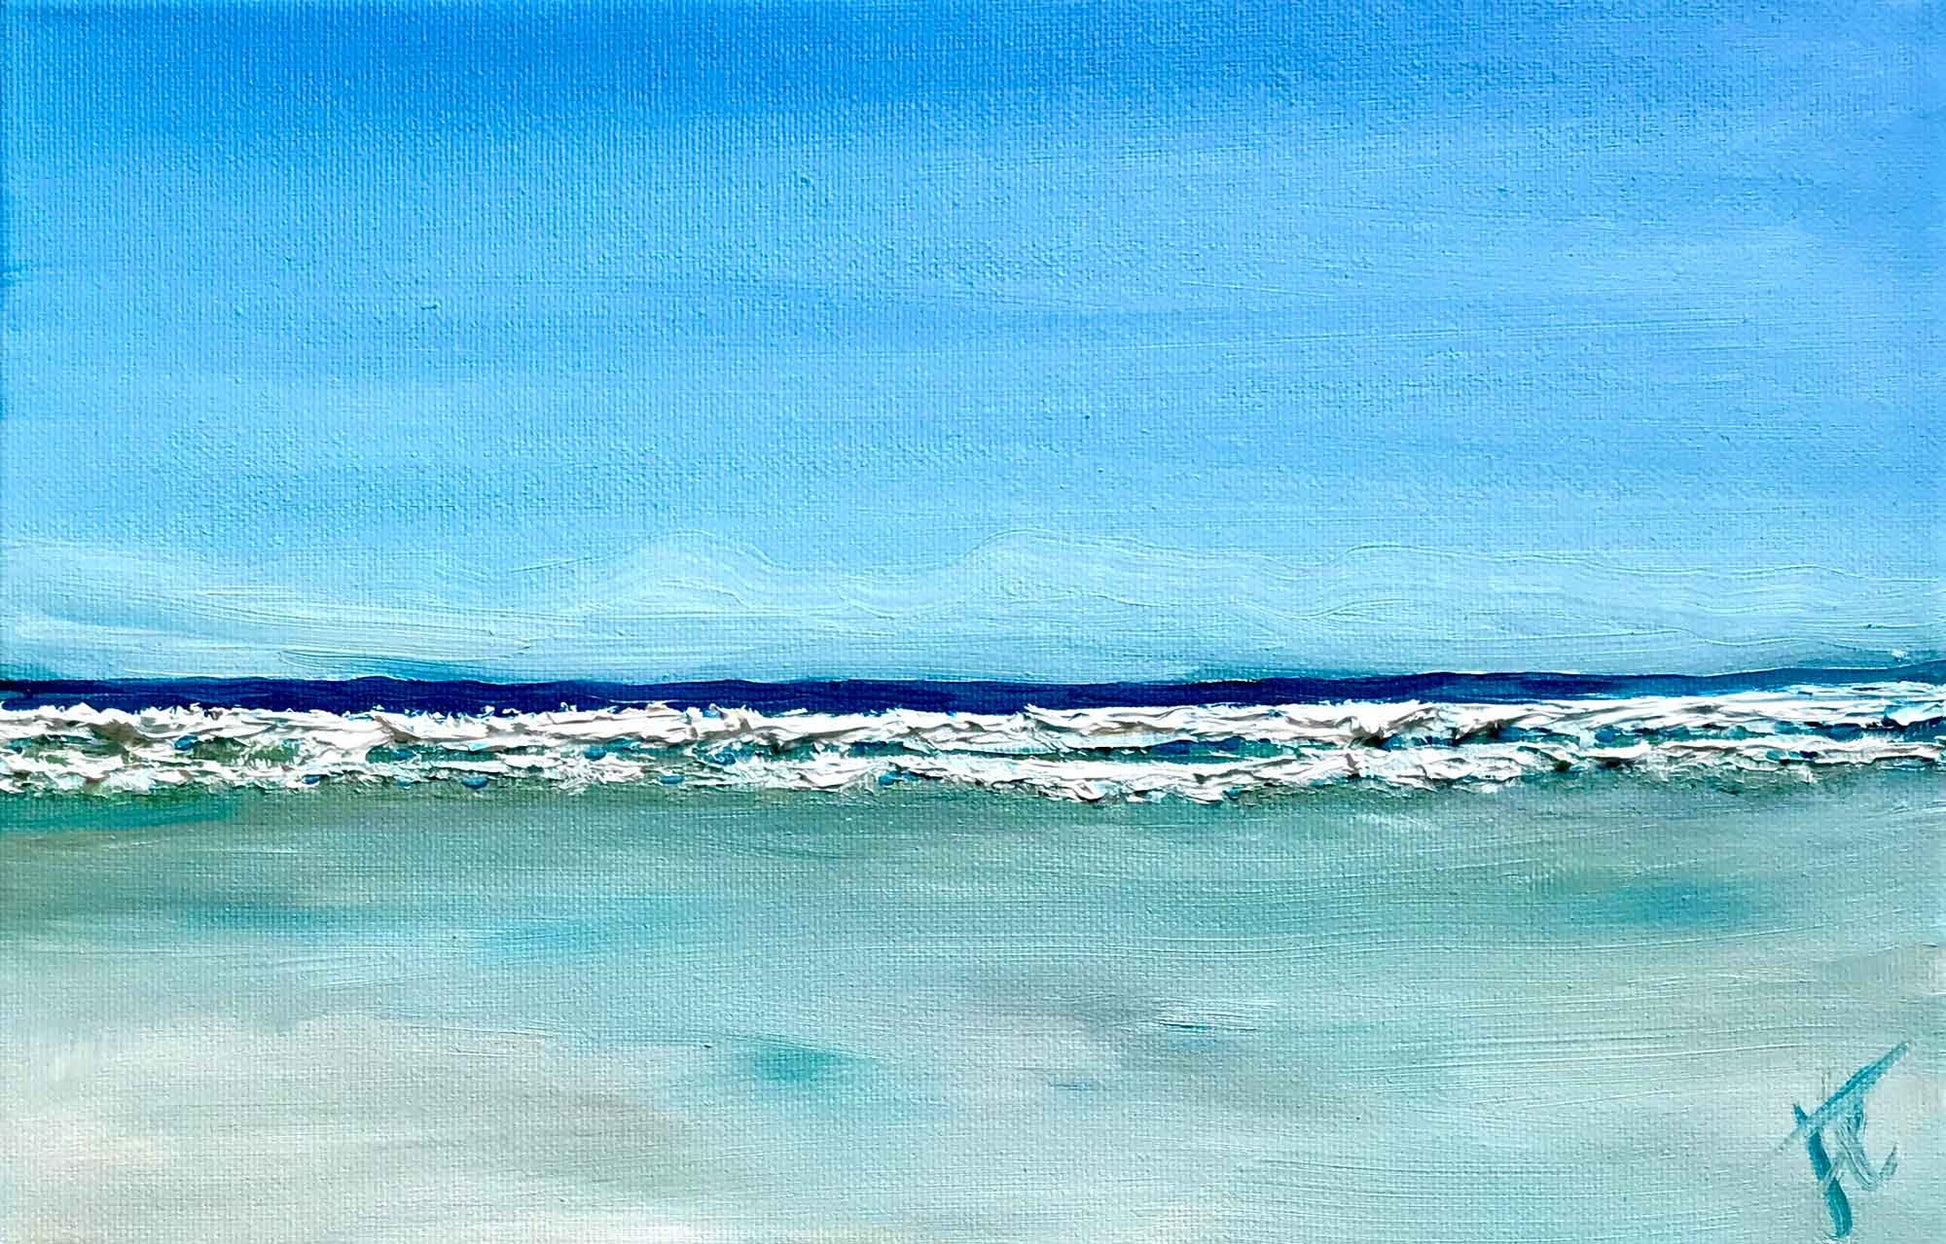 Blue seascape painting with textured waves